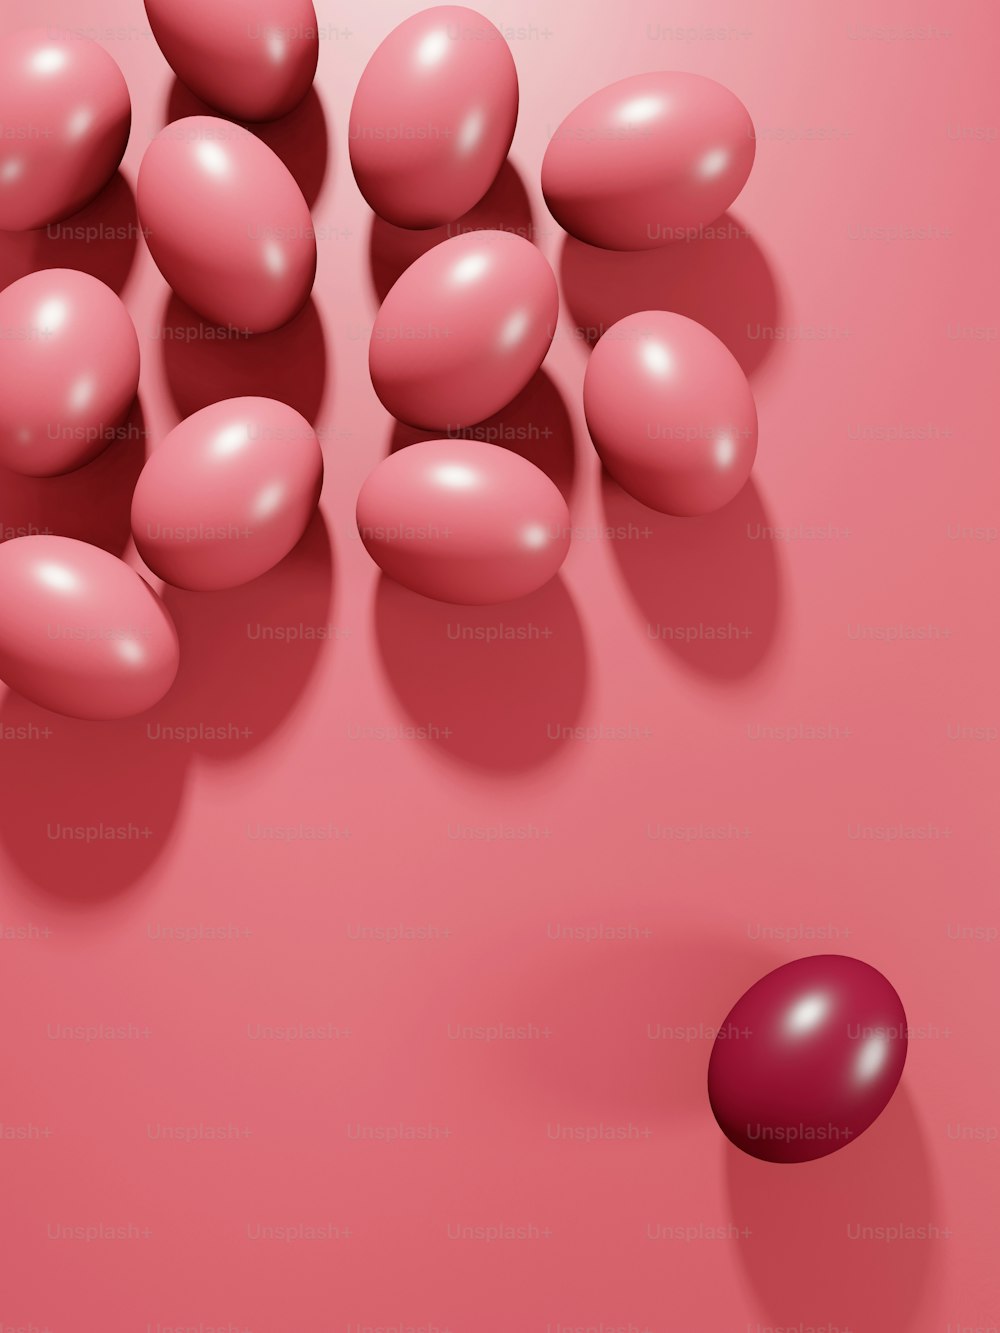 a group of pink balls and a red ball on a pink surface